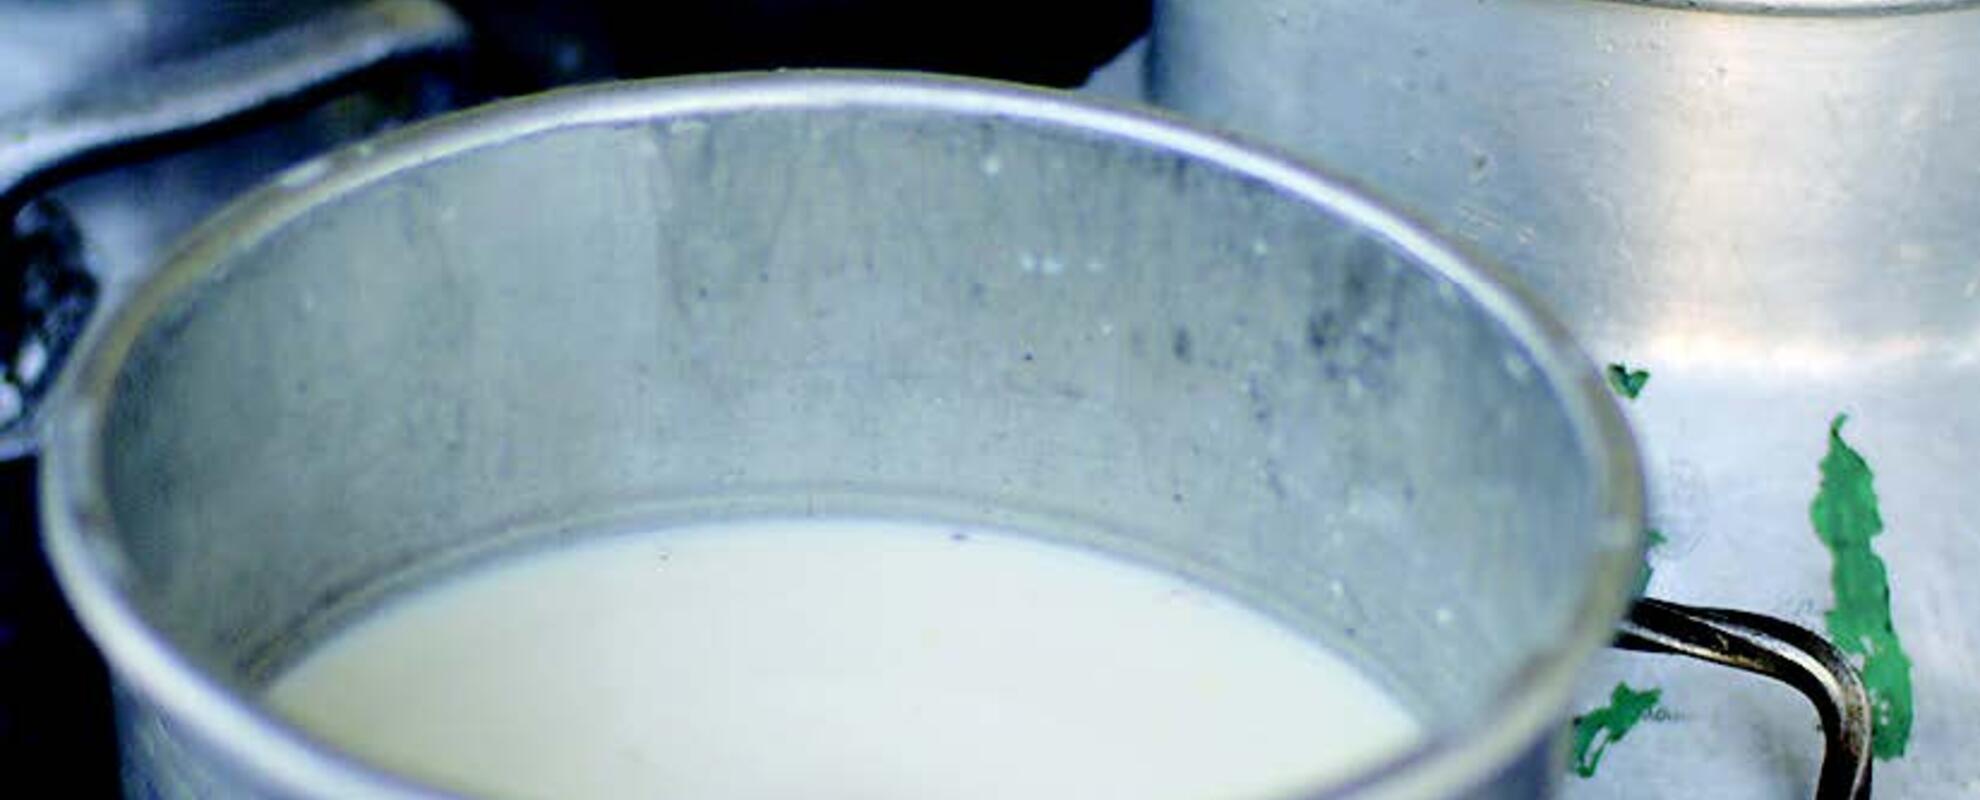 MoreMilk: Making the most of milk